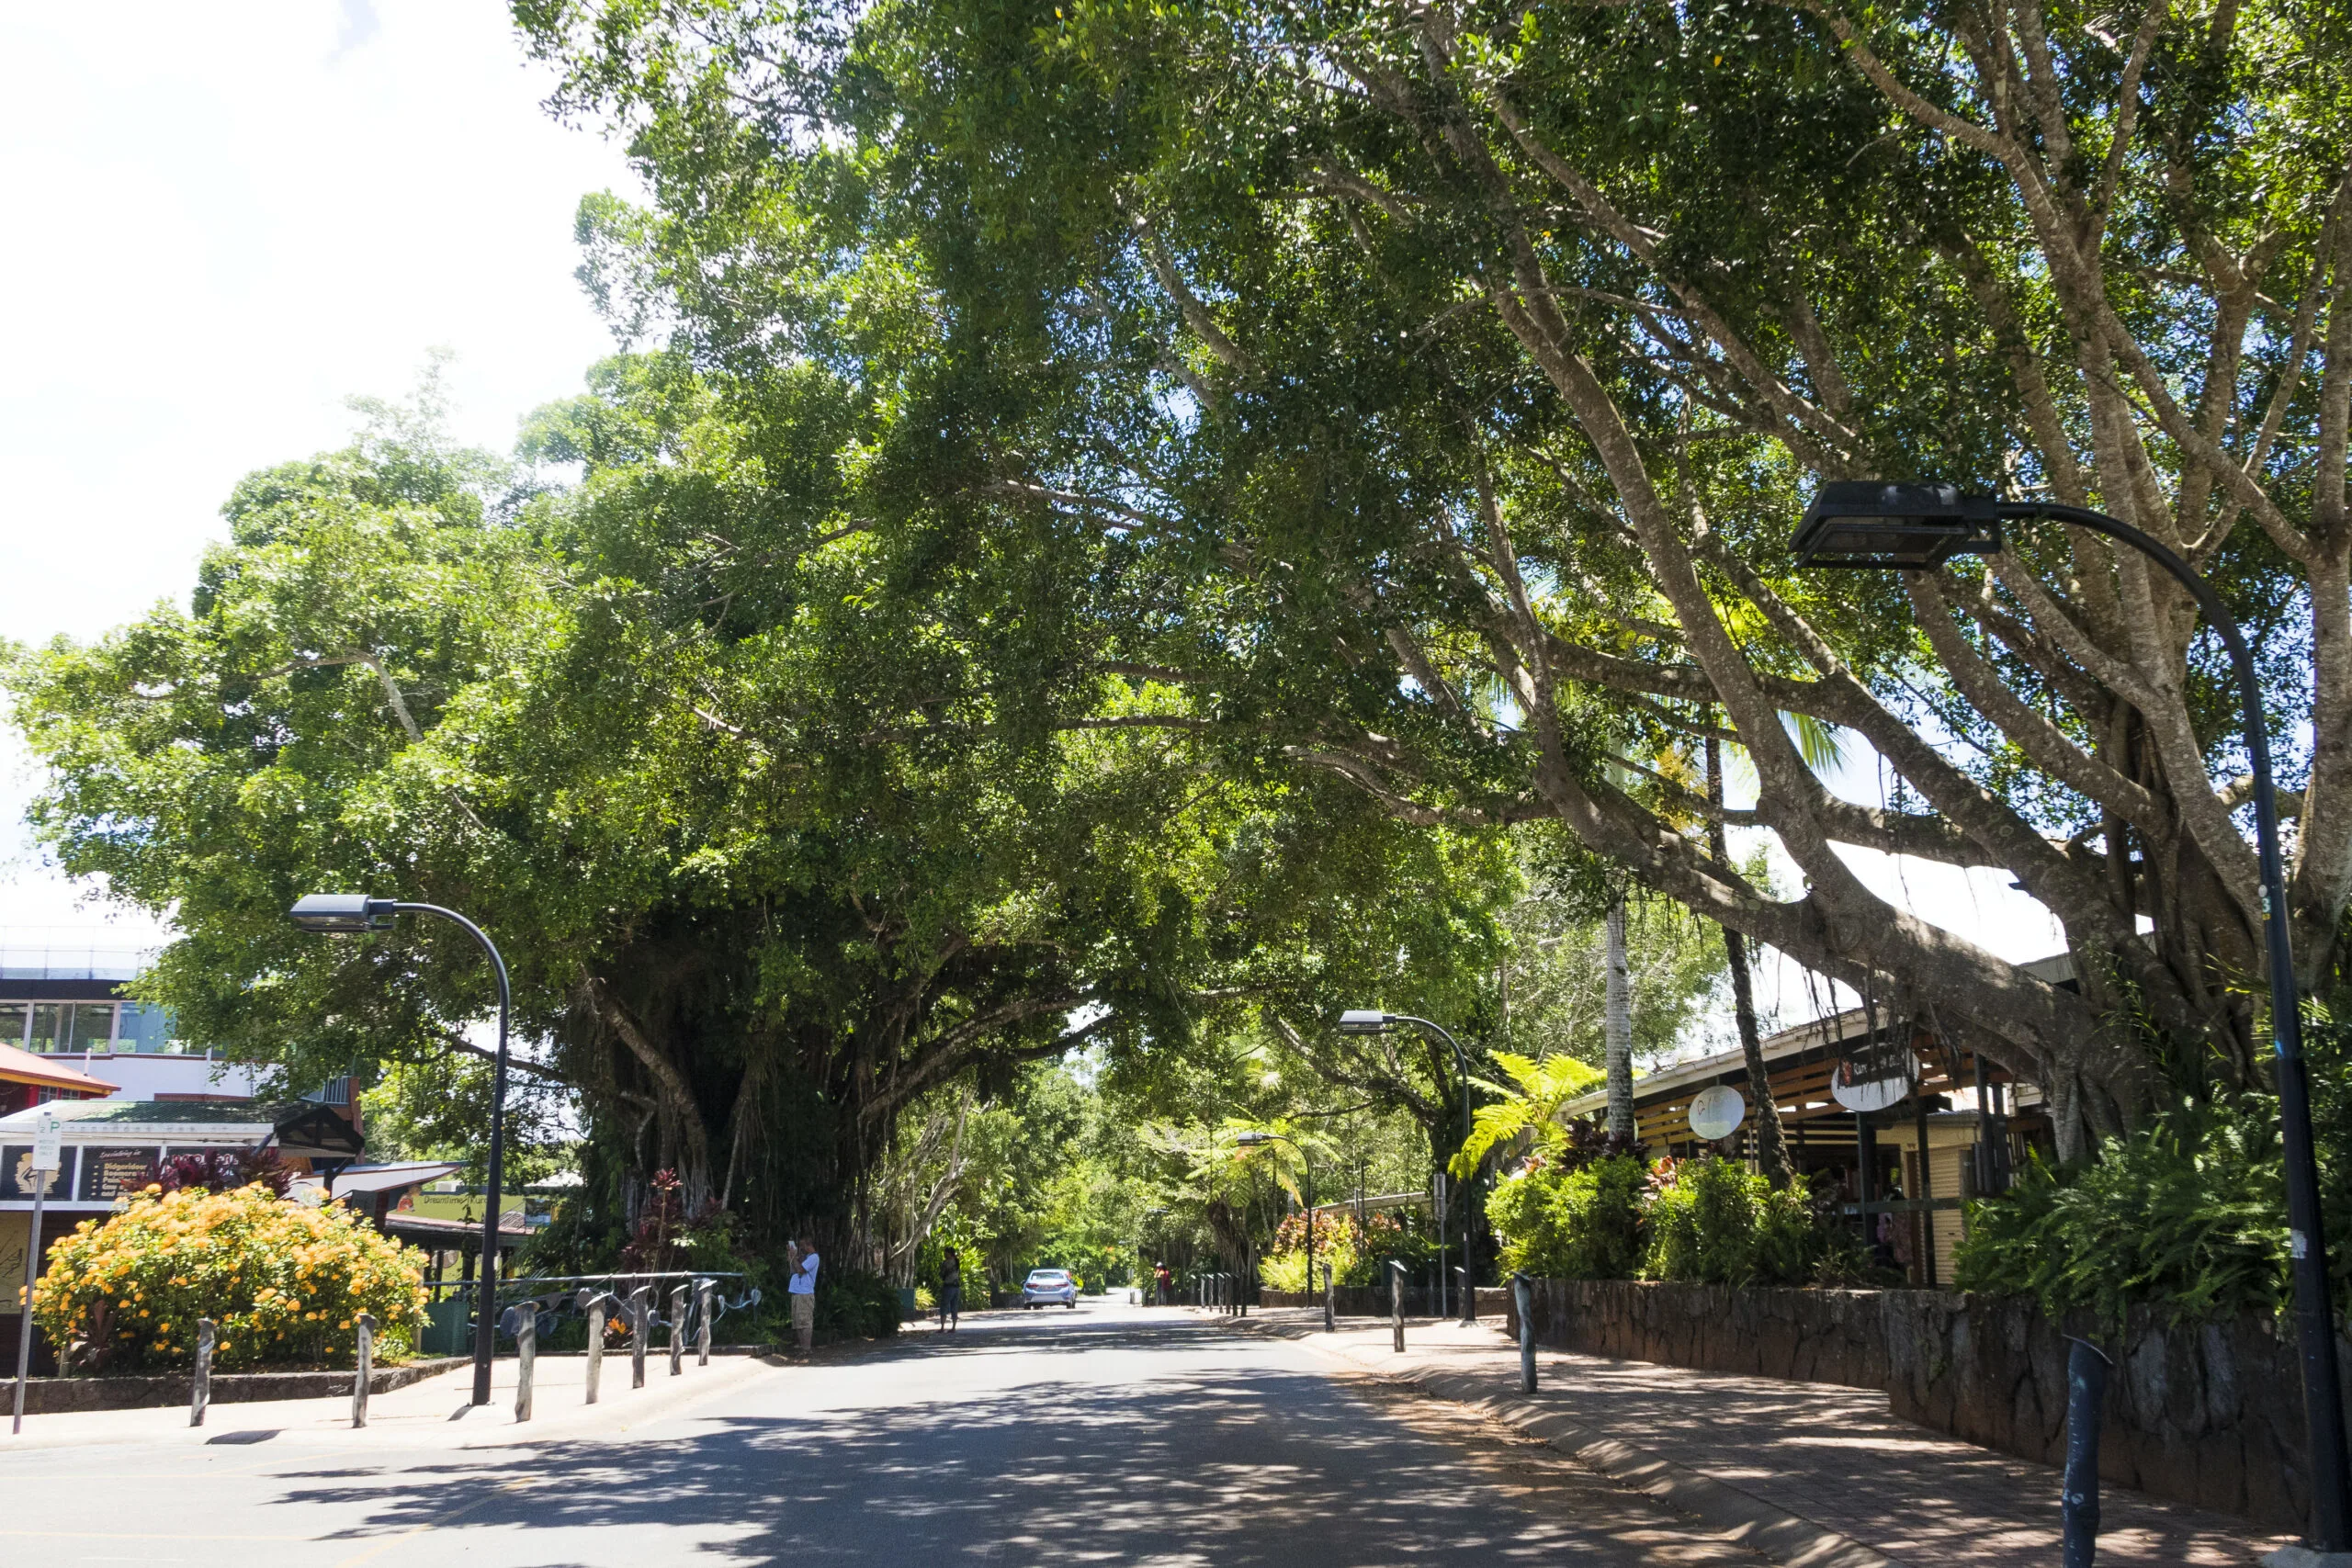 A street lined with trees leads to a mall rainforest village